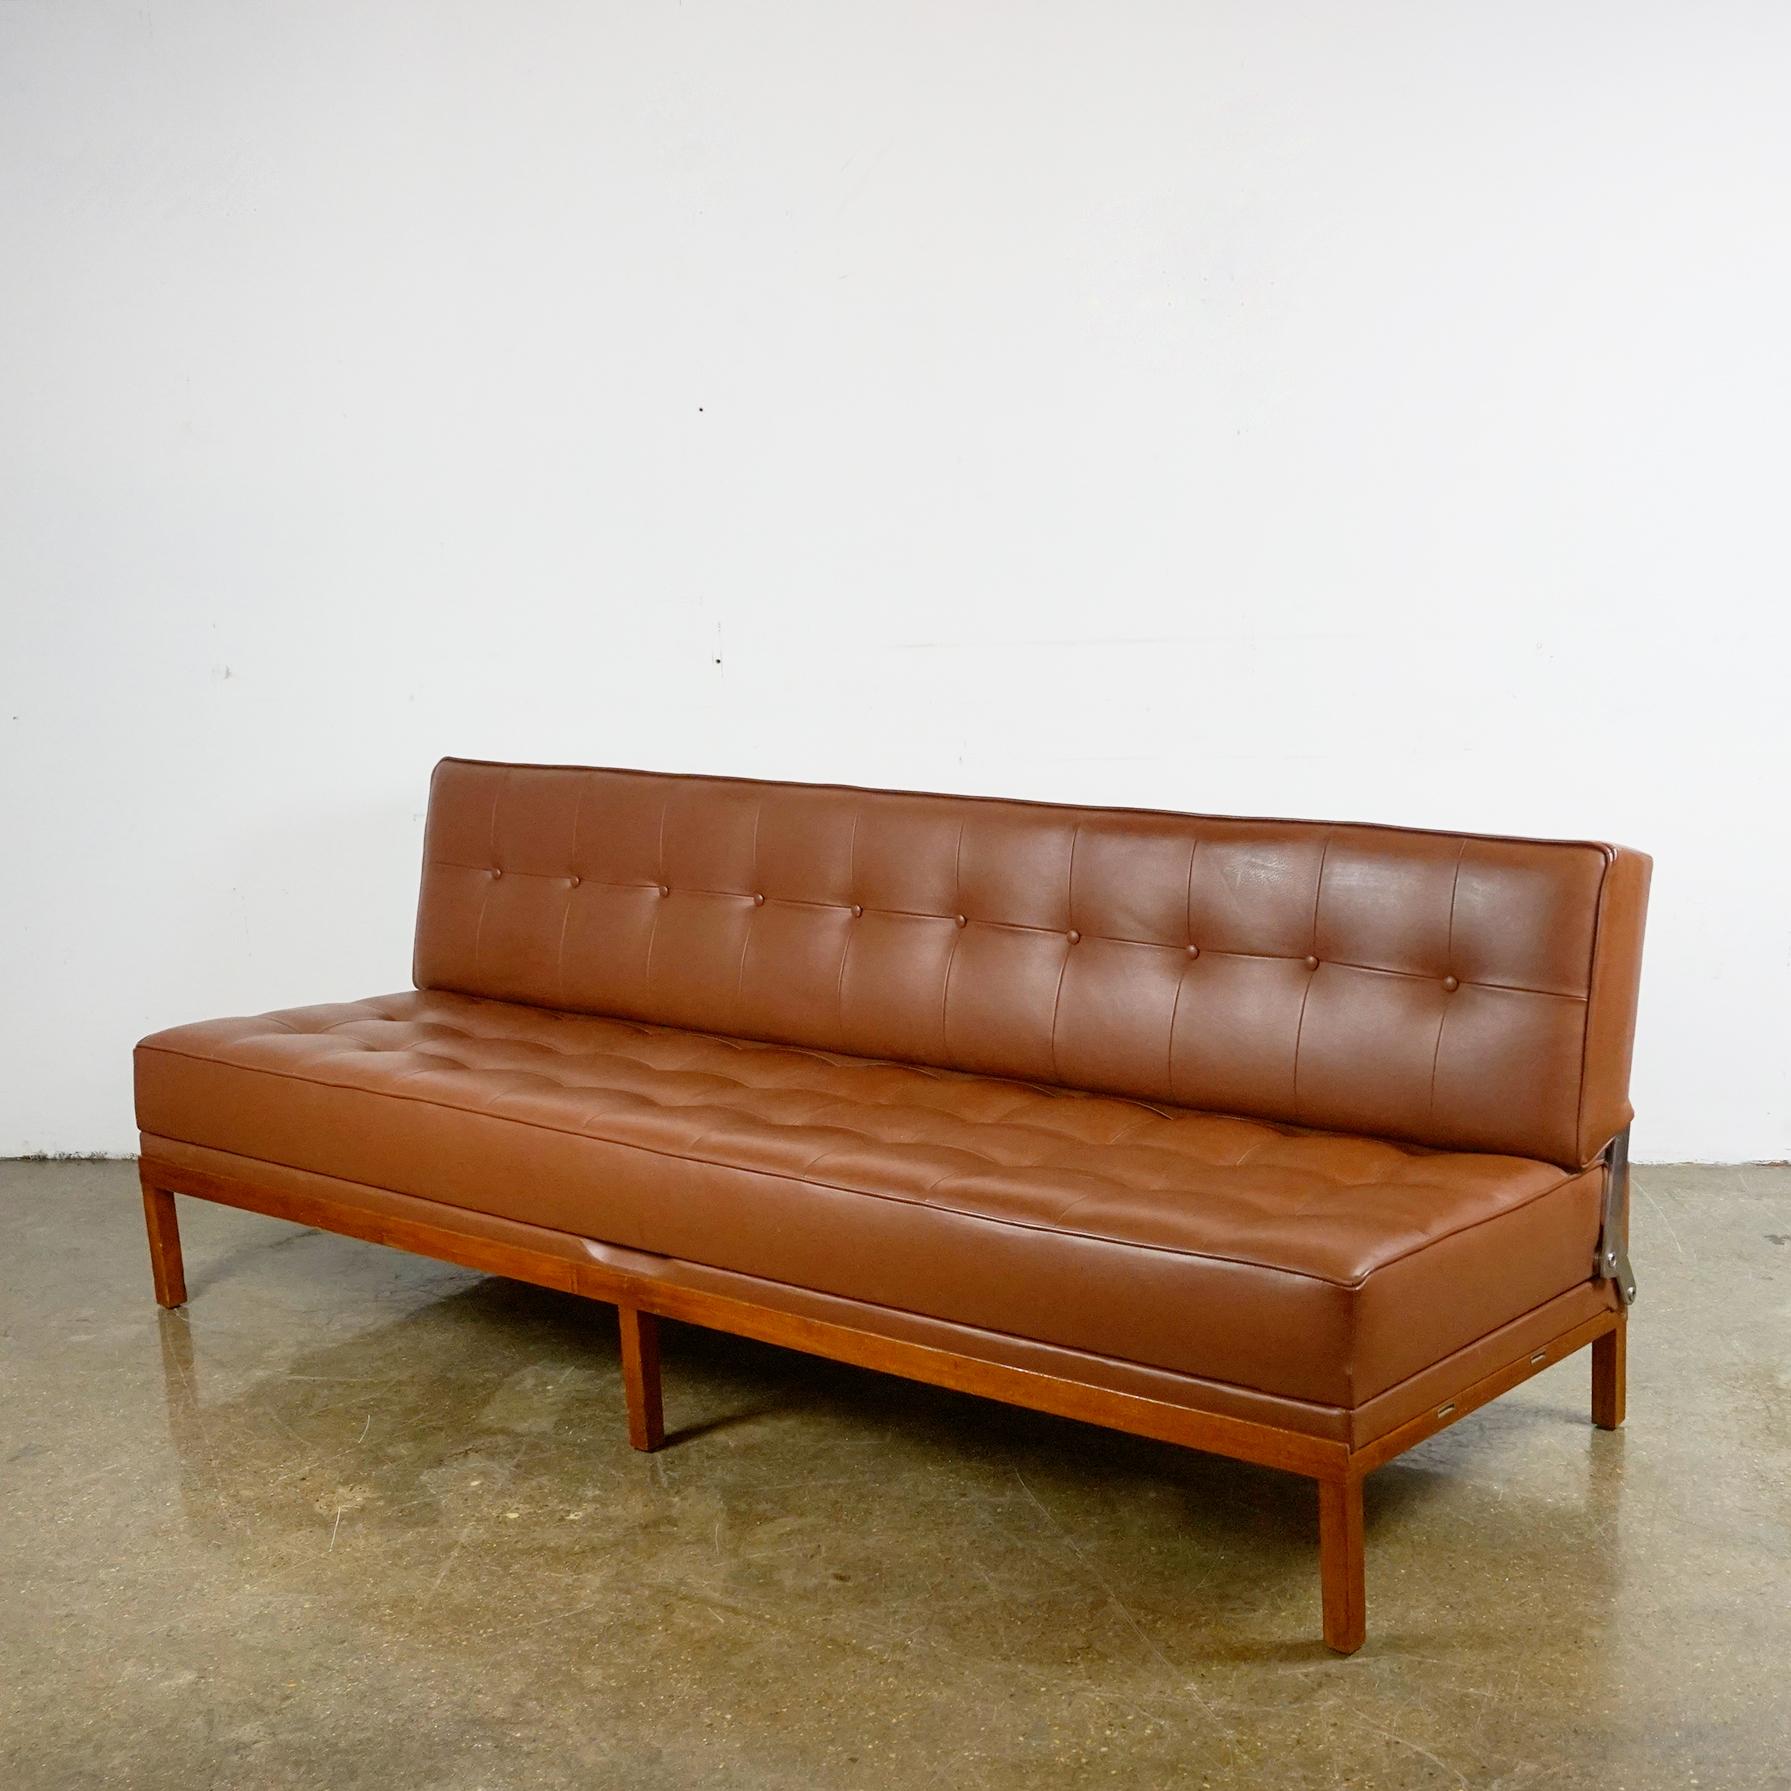 This Austrian Mid-Century Modern vintage sofa or daybed model Constanze with wooden Base and renewed cognac Leather Upholstery was designed by Johannes Spalt 1961 for Wittmann, Etsdorf, Austria. 
It is very easy to handle by one hand to make the